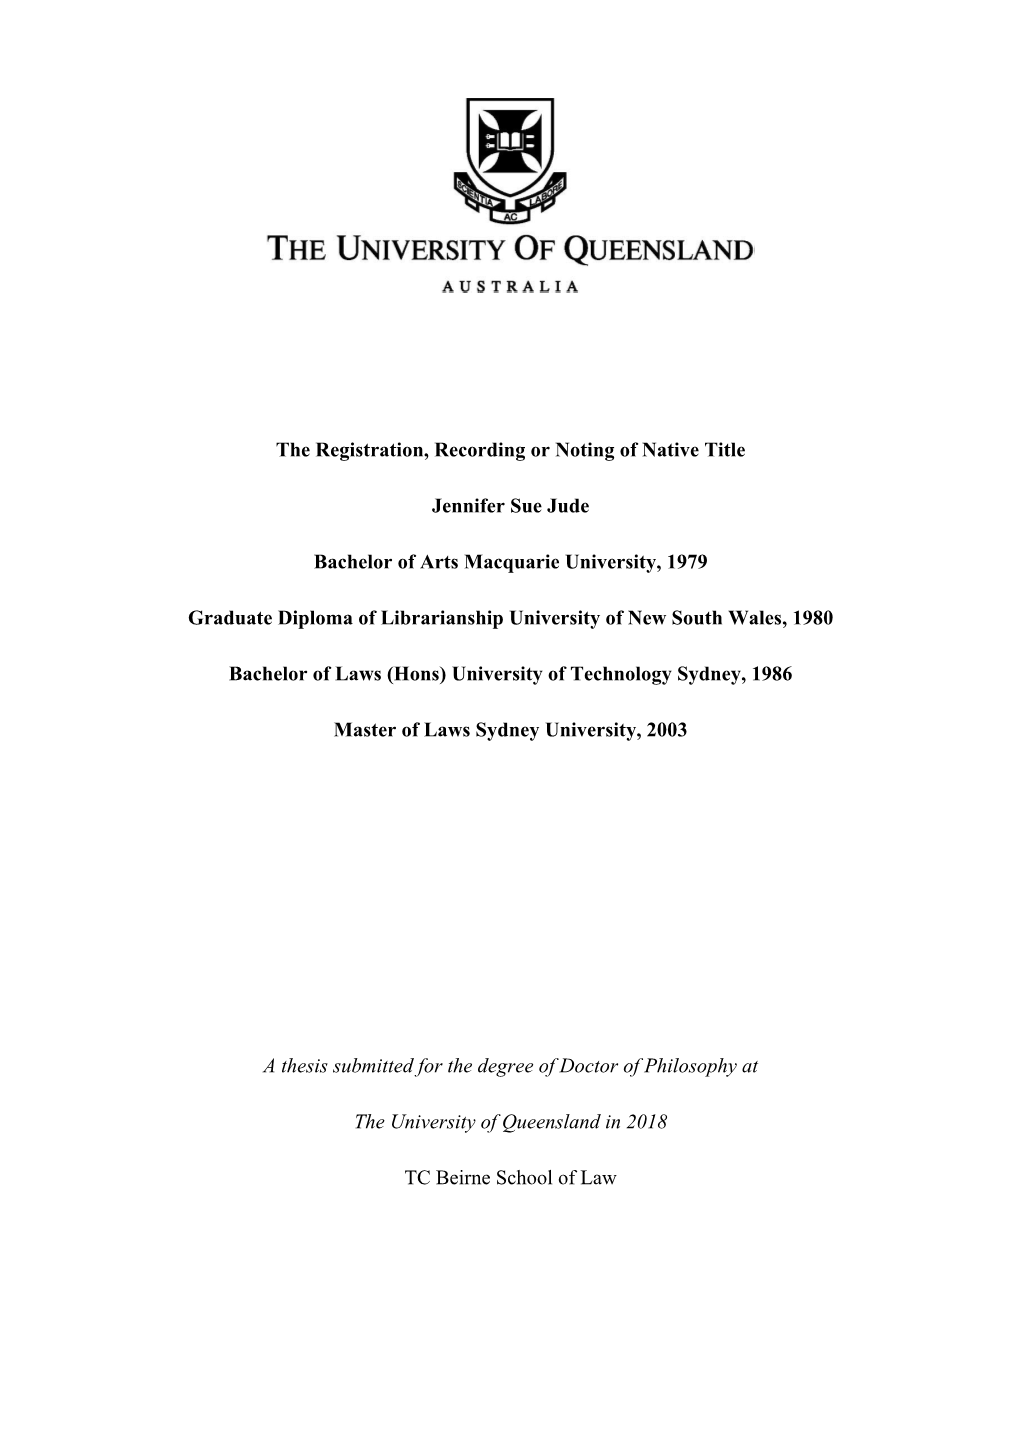 The Registration, Recording Or Noting of Native Title